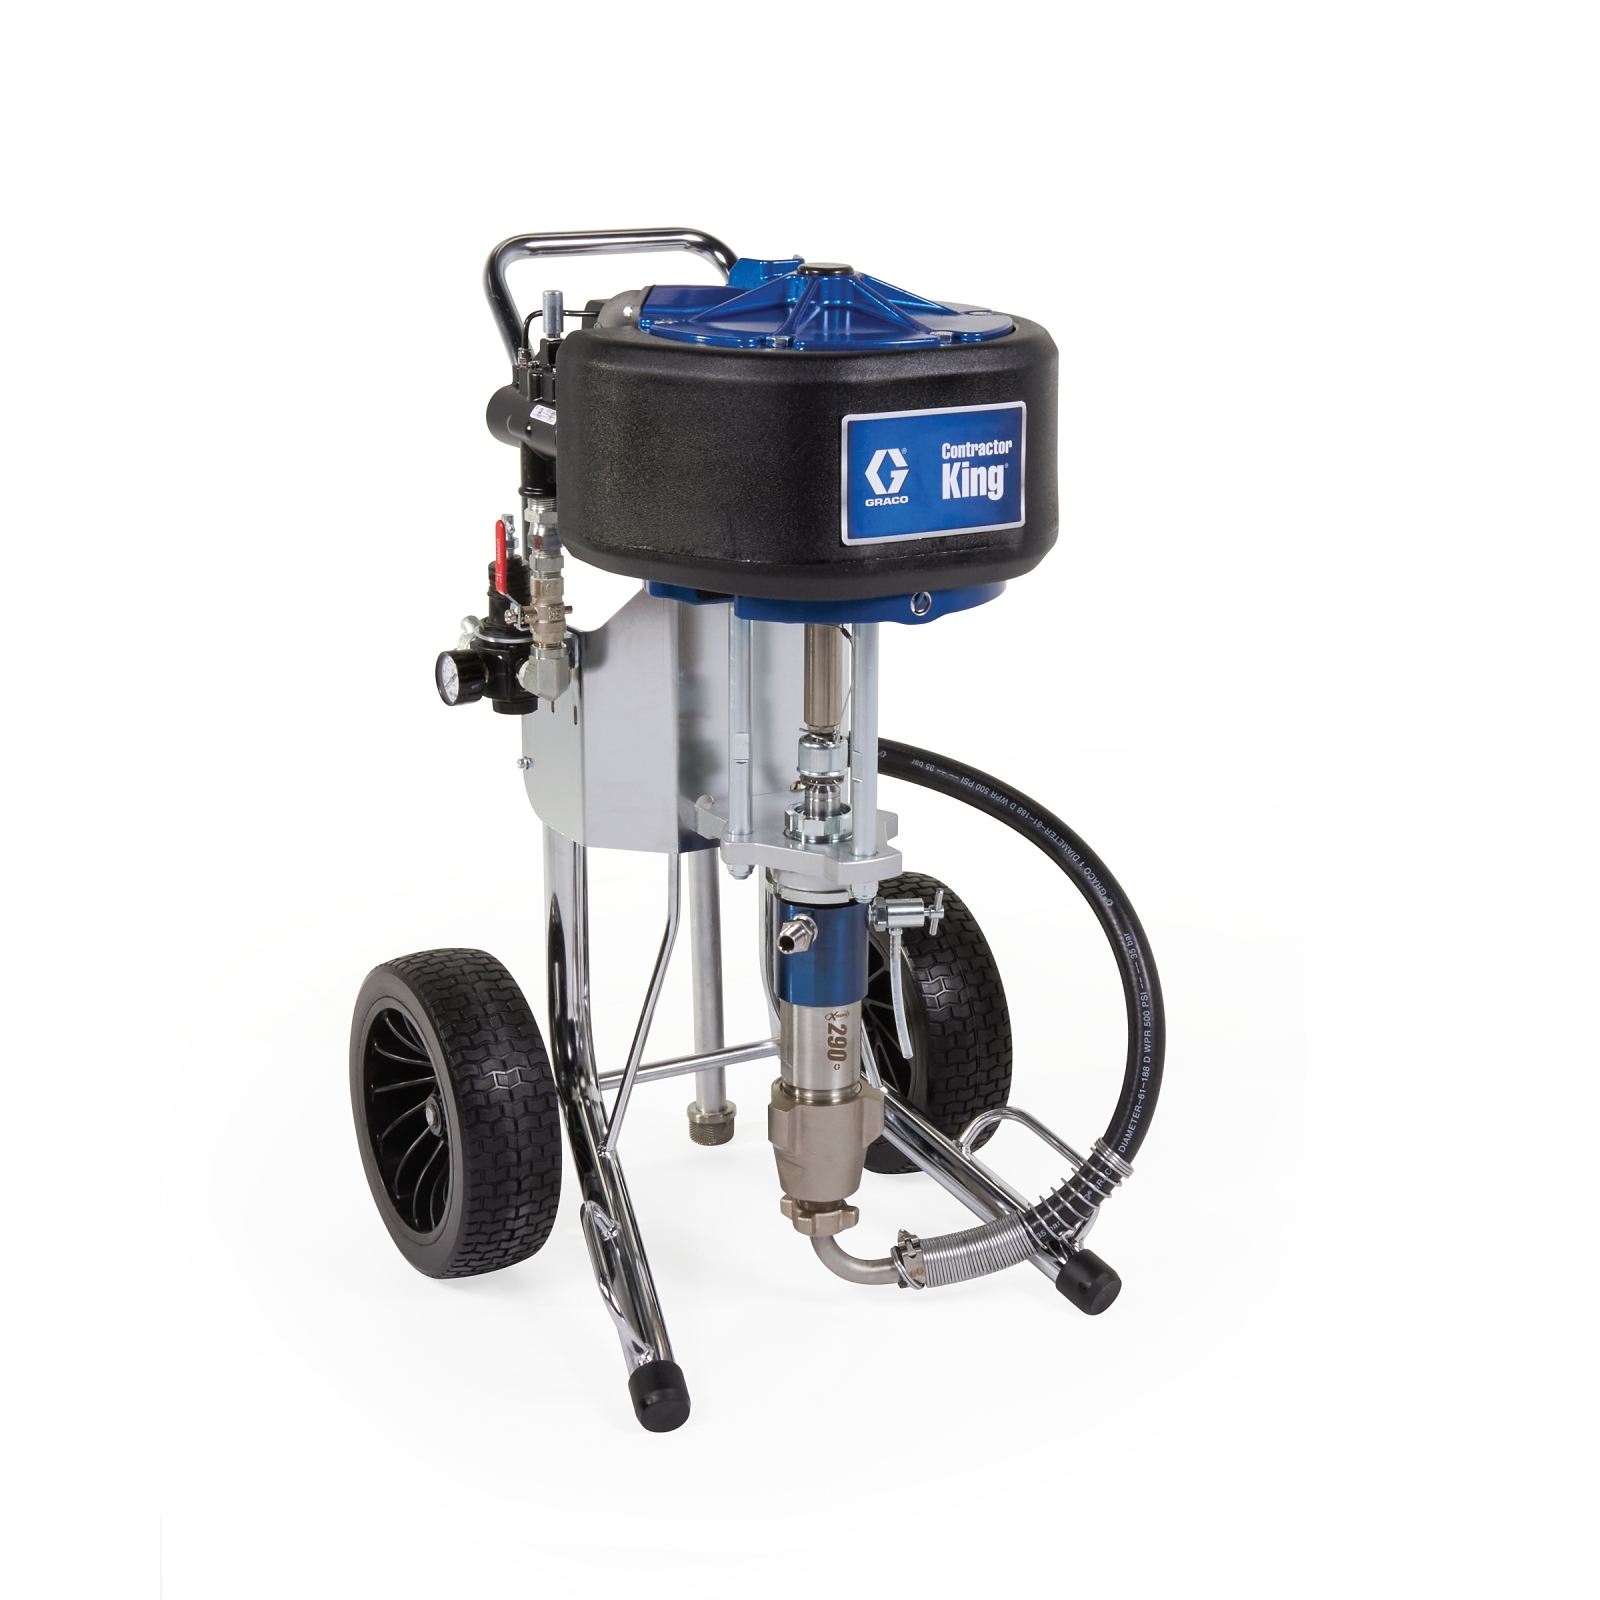 Graco 279005 Contractor King 45:1 Air Powered Airless Sprayer, Bare